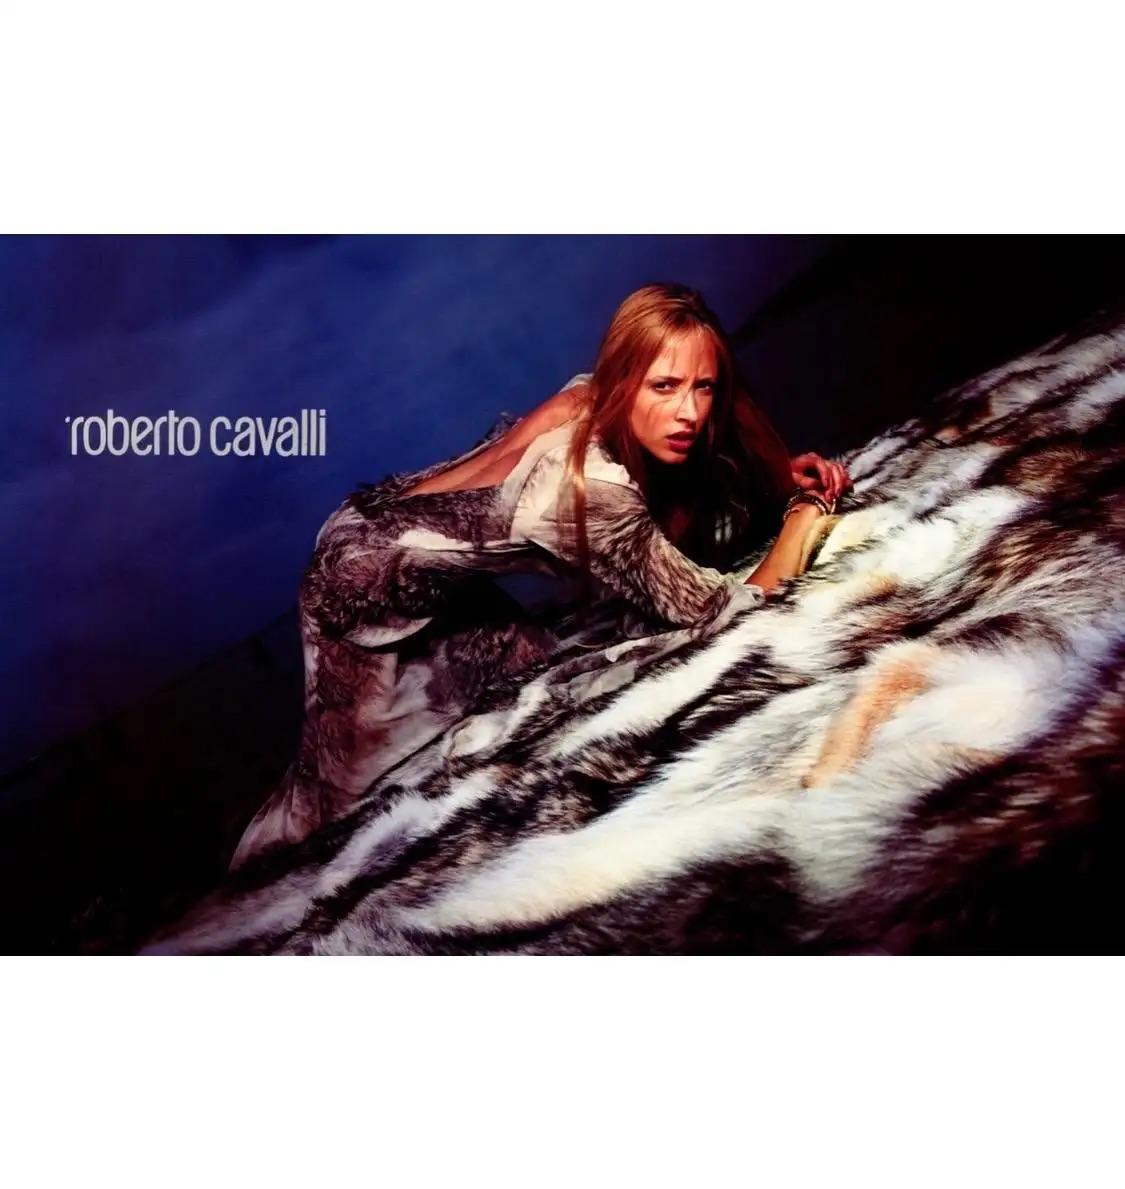 Presenting a grey cowhide print Roberto Cavalli dress. From the Fall/Winter 1999 collection, this dress was highlighted in the season's ad campaign. This fabulous dress is constructed entirely of a grey and tan natural cow hide print. The dress